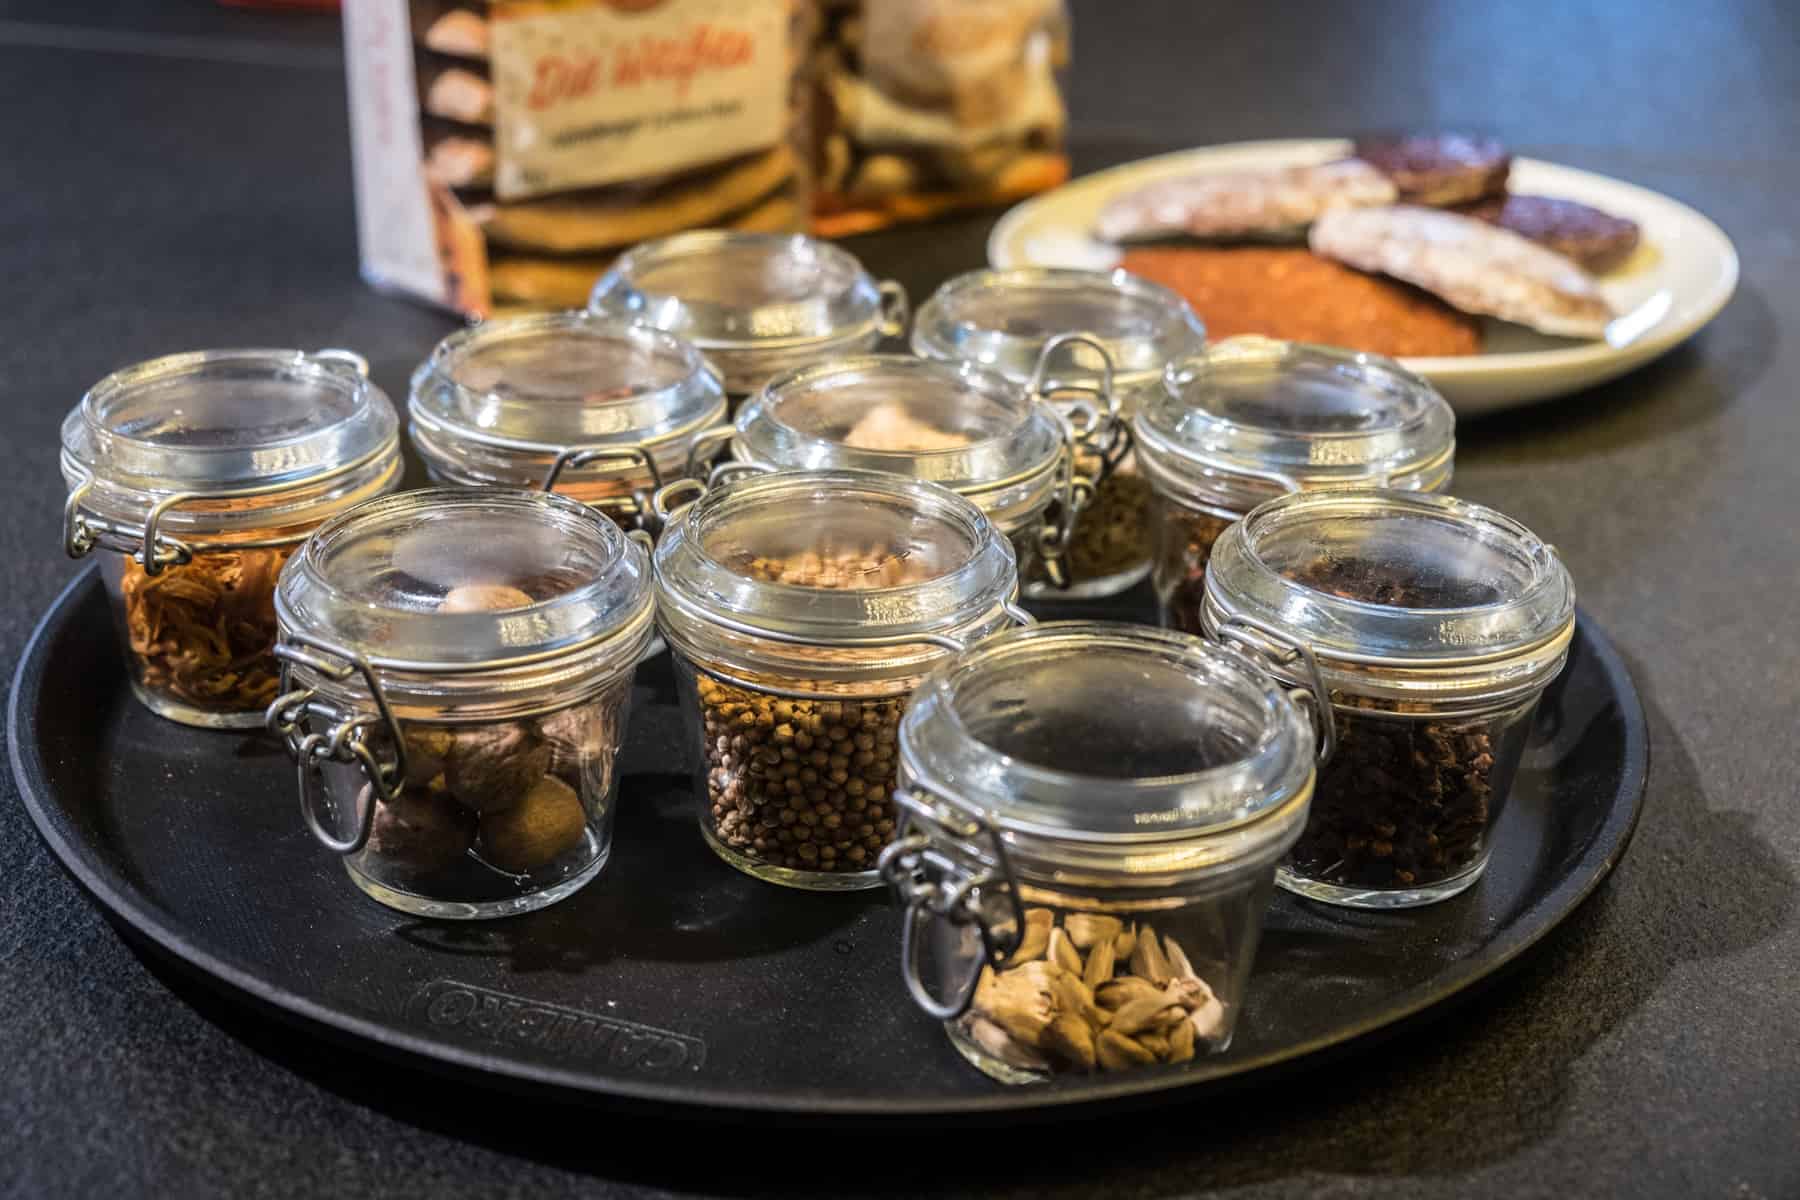 Ten glass jars contain the various spices used to make Nuremberg gingerbread - the baked and ready ones seen in the background